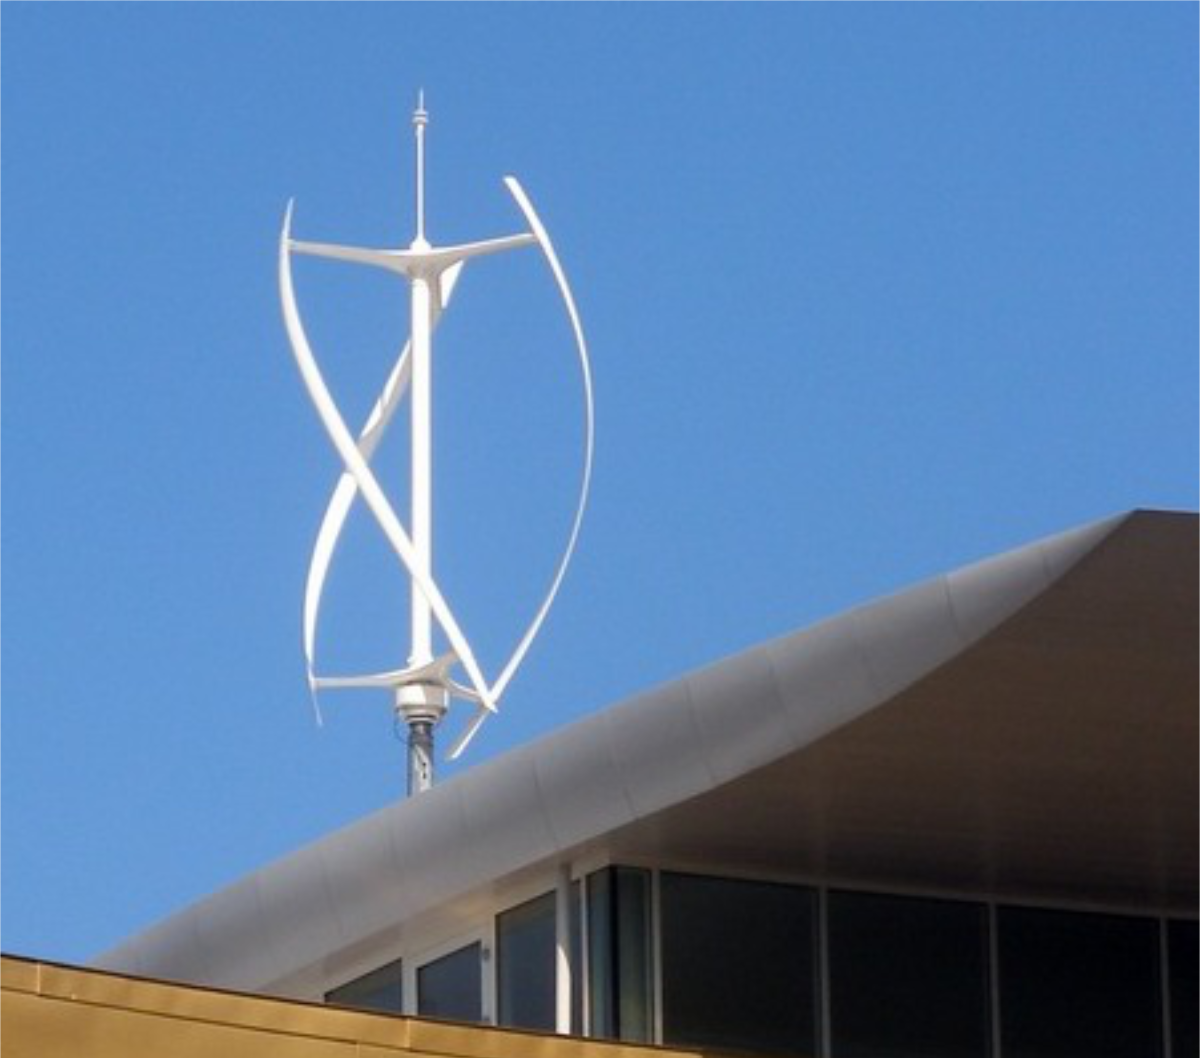 Vertical Axis Wind Turbine For Home